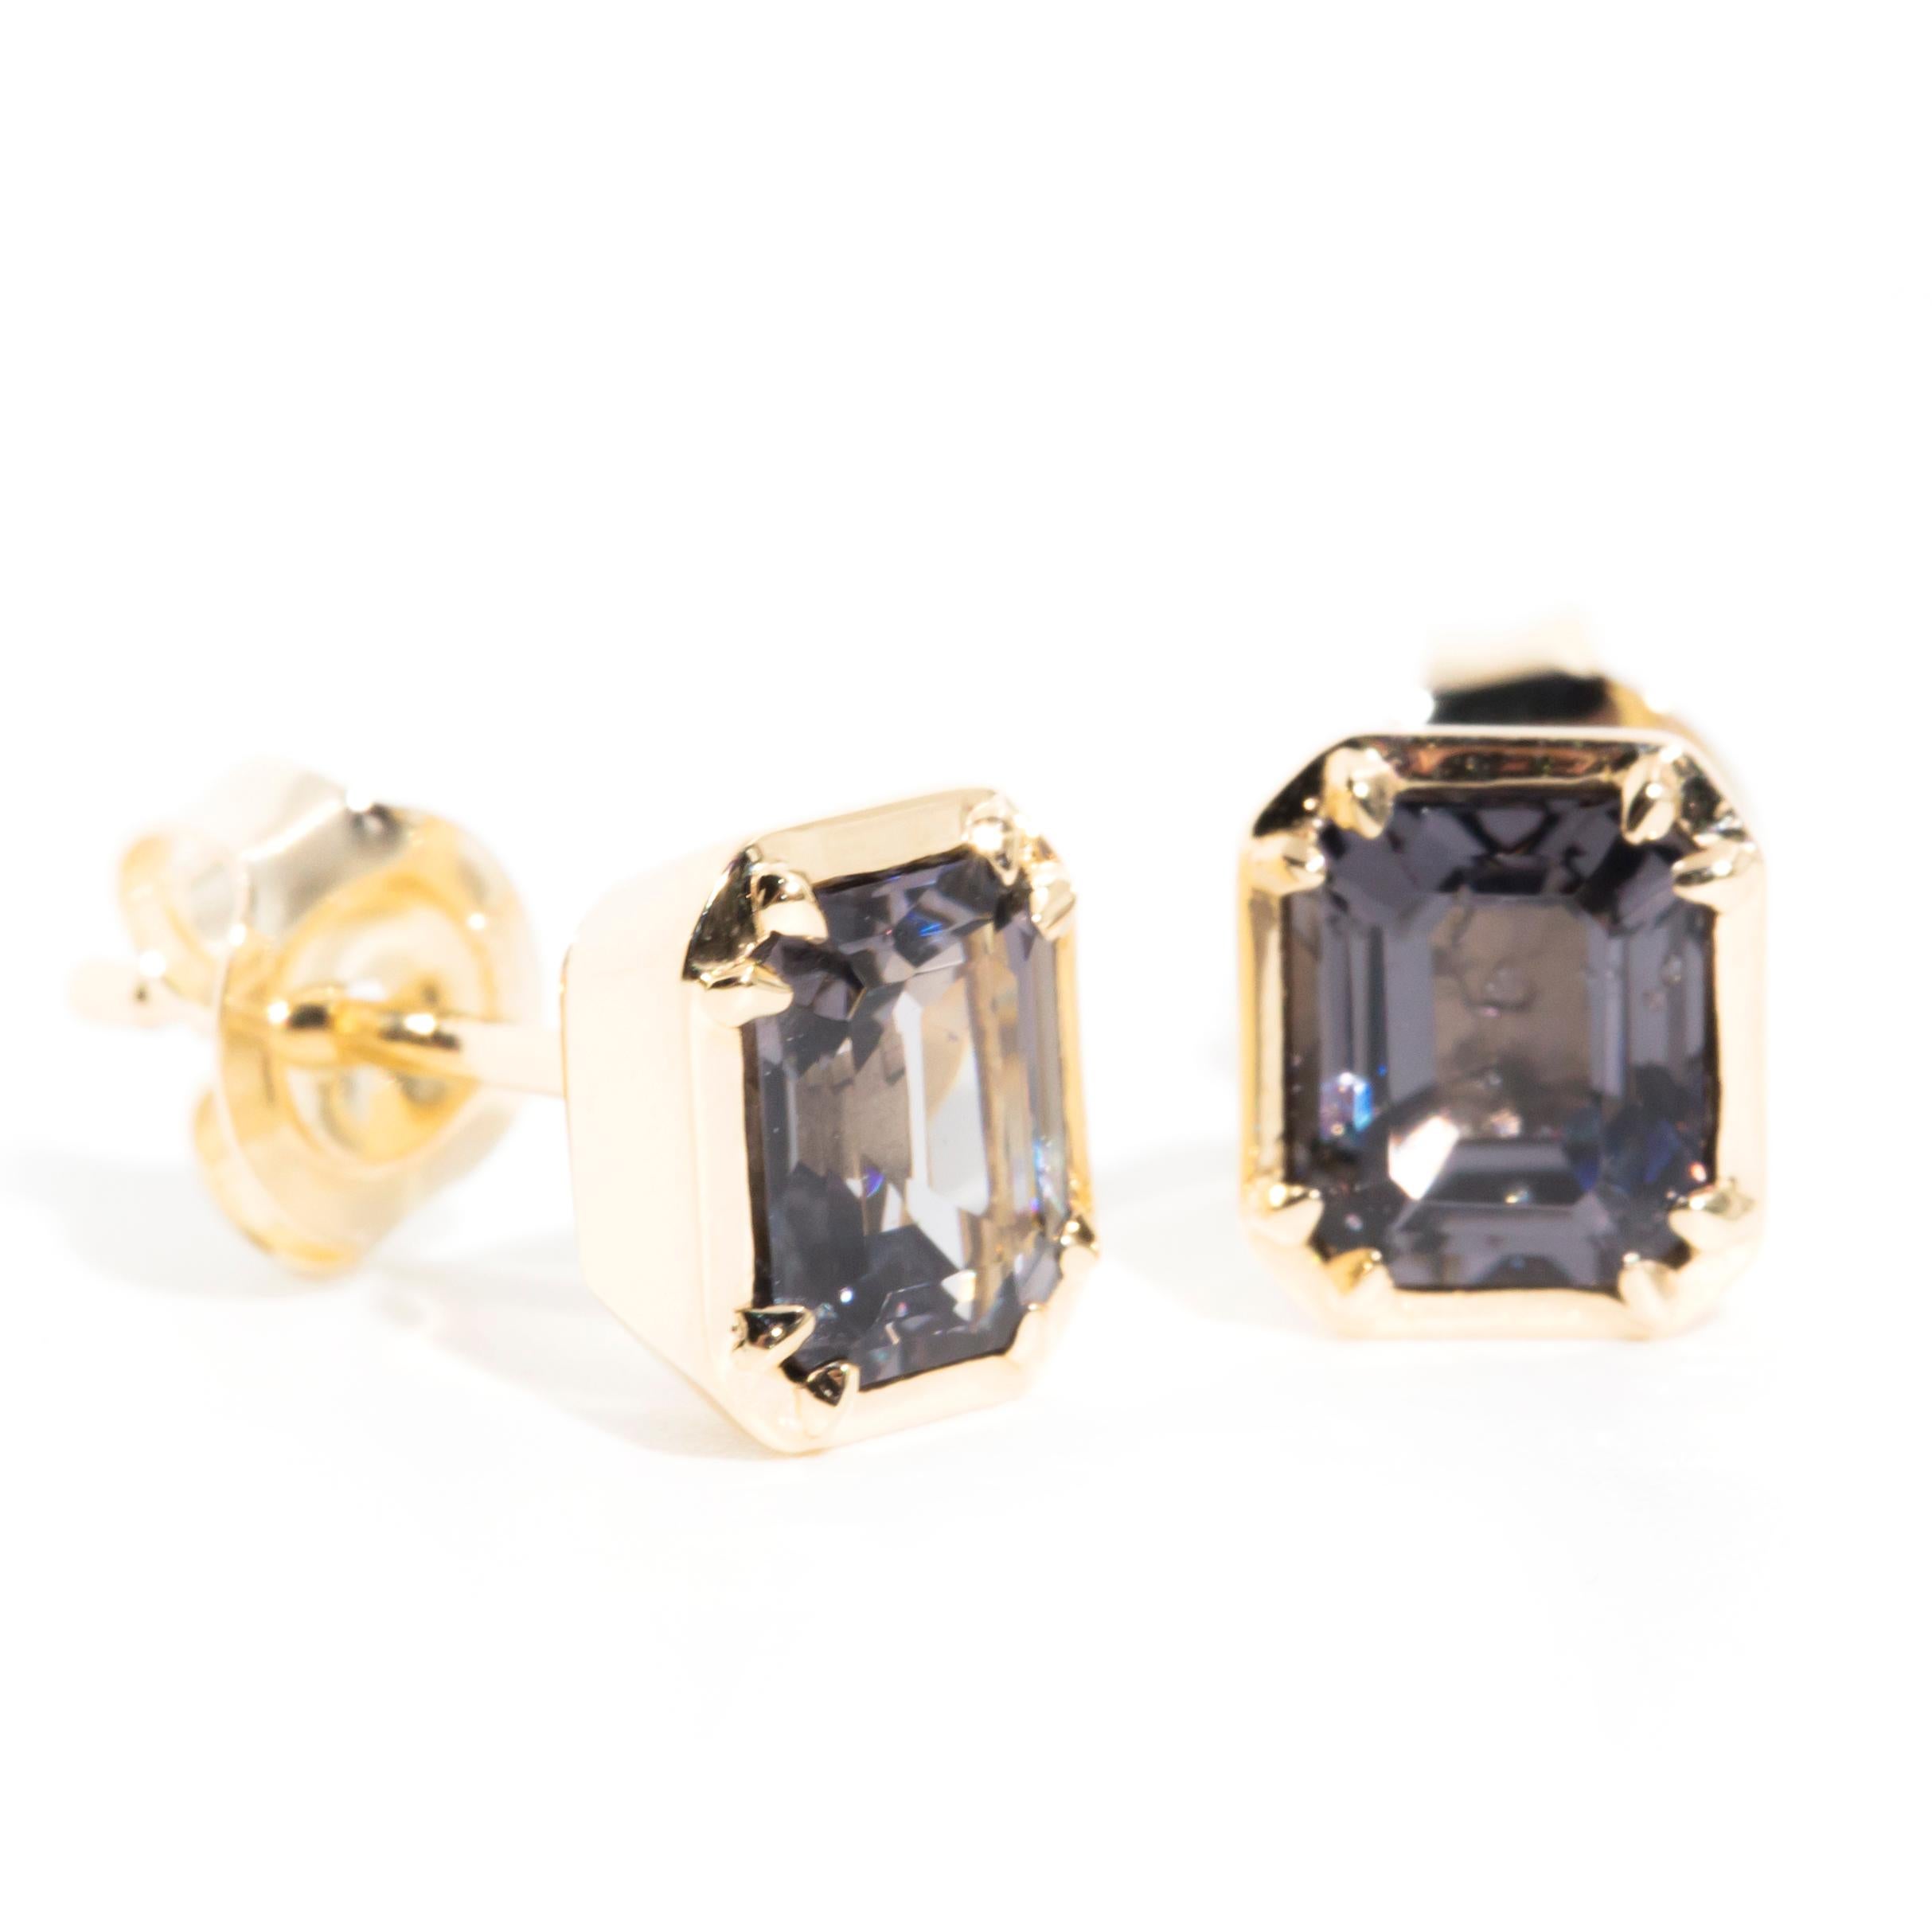 Purple Grey Emerald Cut Spinel Contemporary Stud Style Earrings in 9 Carat Gold 4